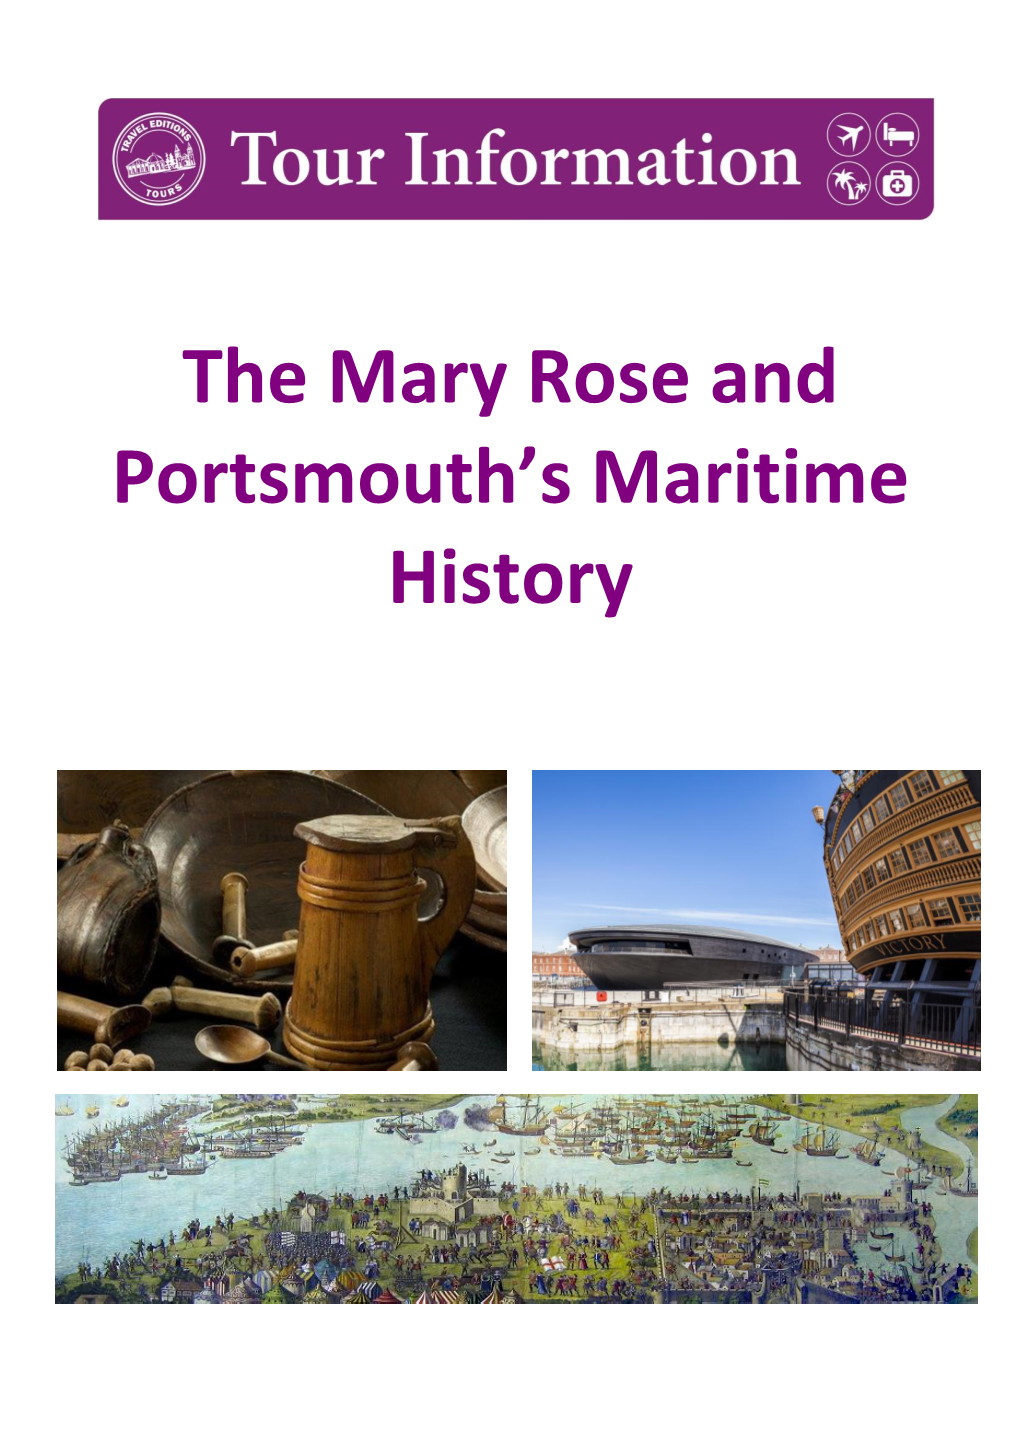 The Mary Rose and Portsmouth's Maritime History